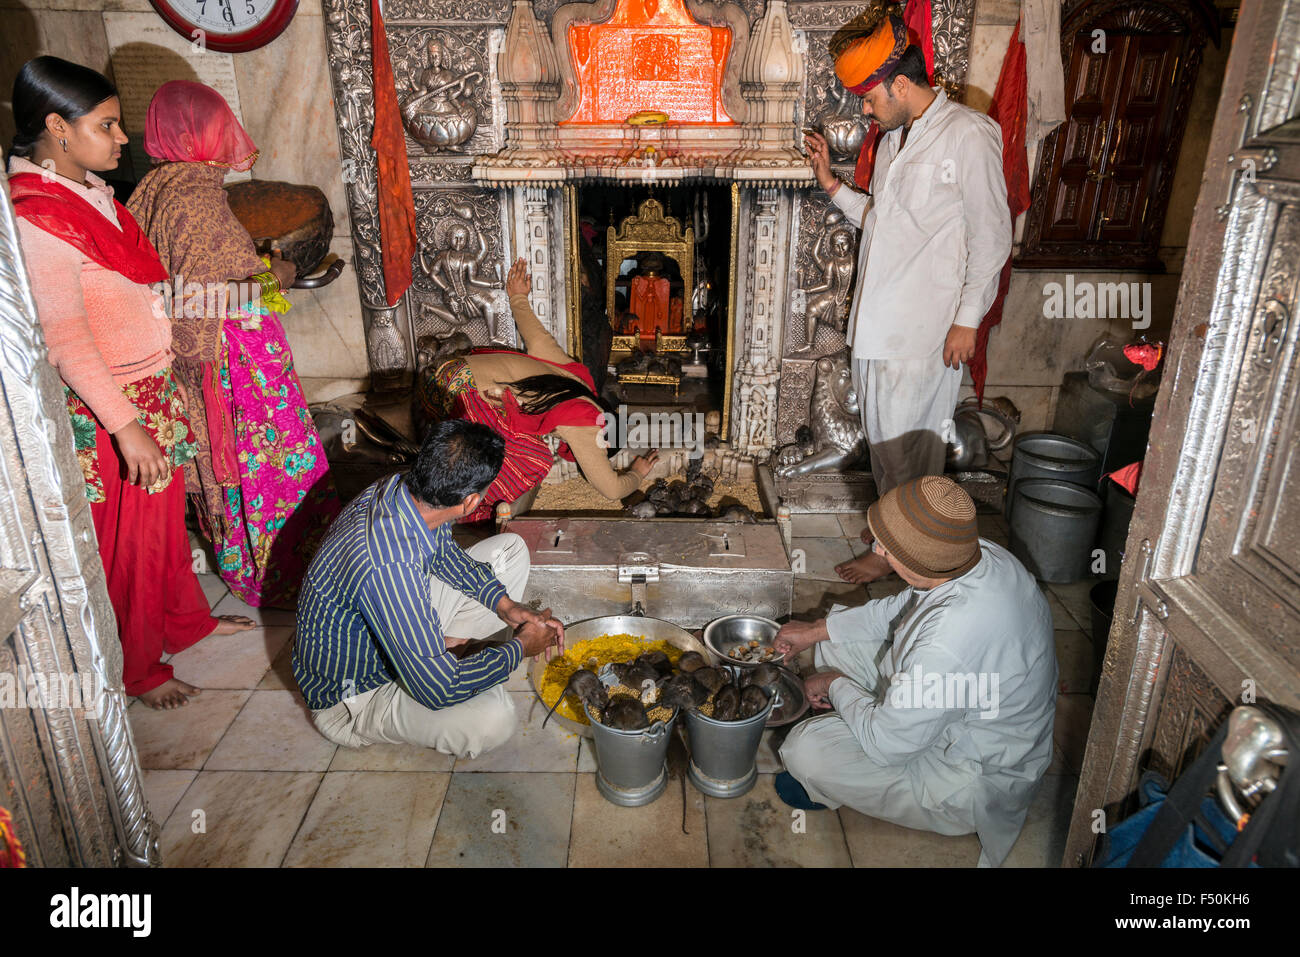 Pilgrims are making offerings at the holy sanctuary of Karni Mata Temple, a famous Hindu temple dedicated to Karni Mata. It is a Stock Photo